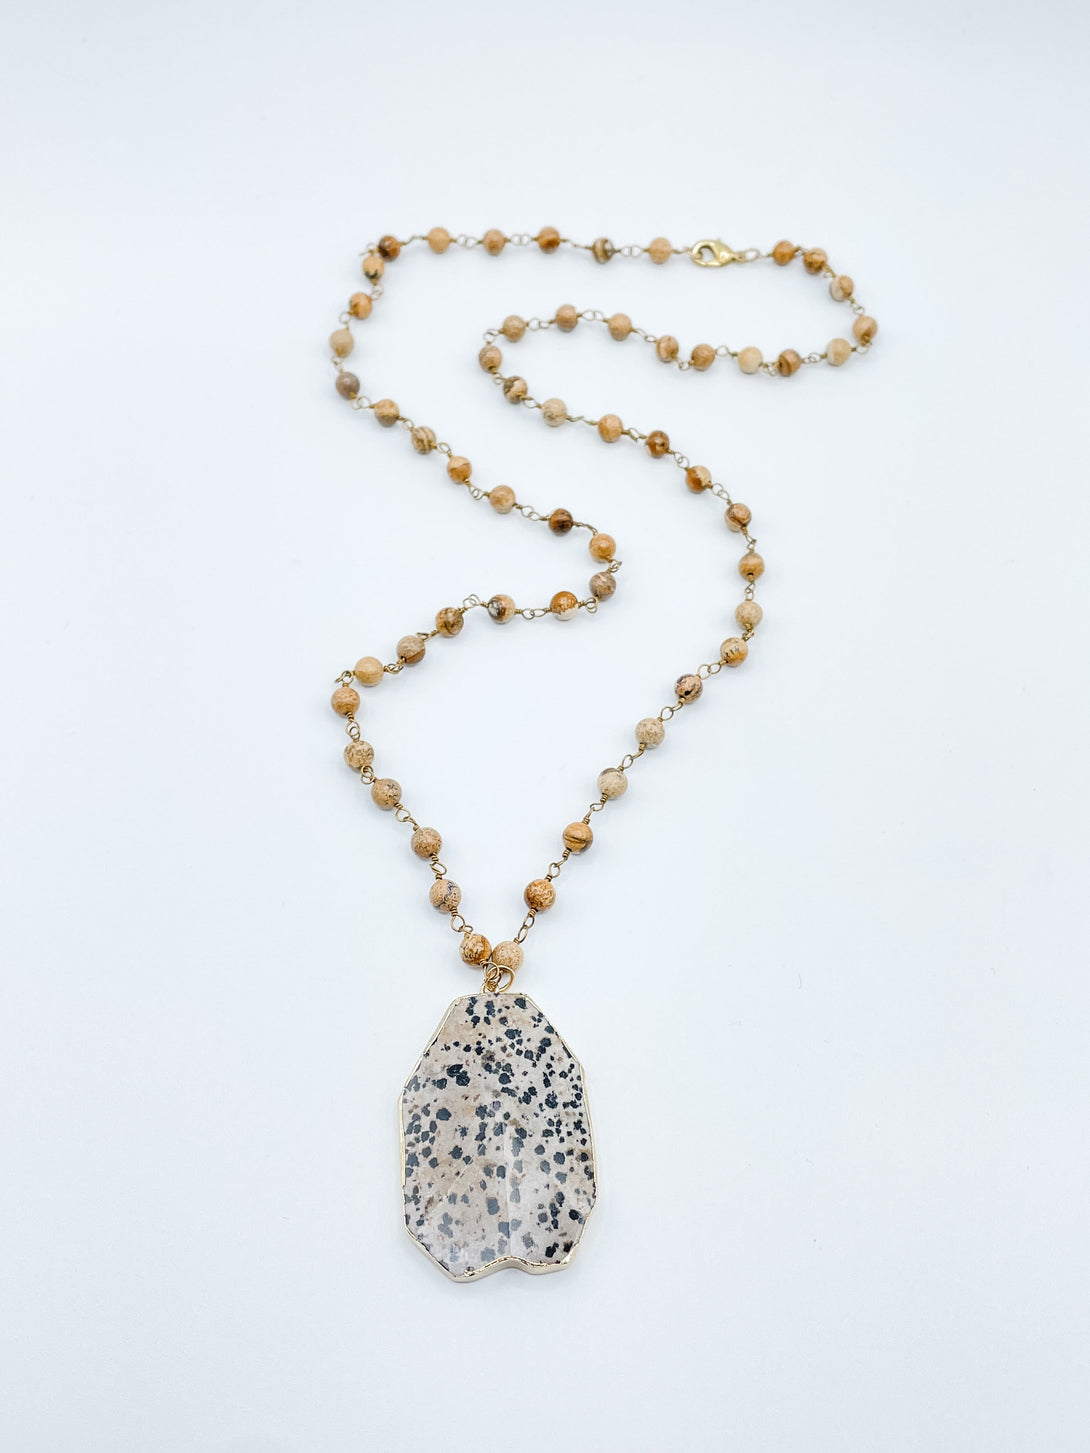 Long Beaded Necklace with Large Stone Pendant